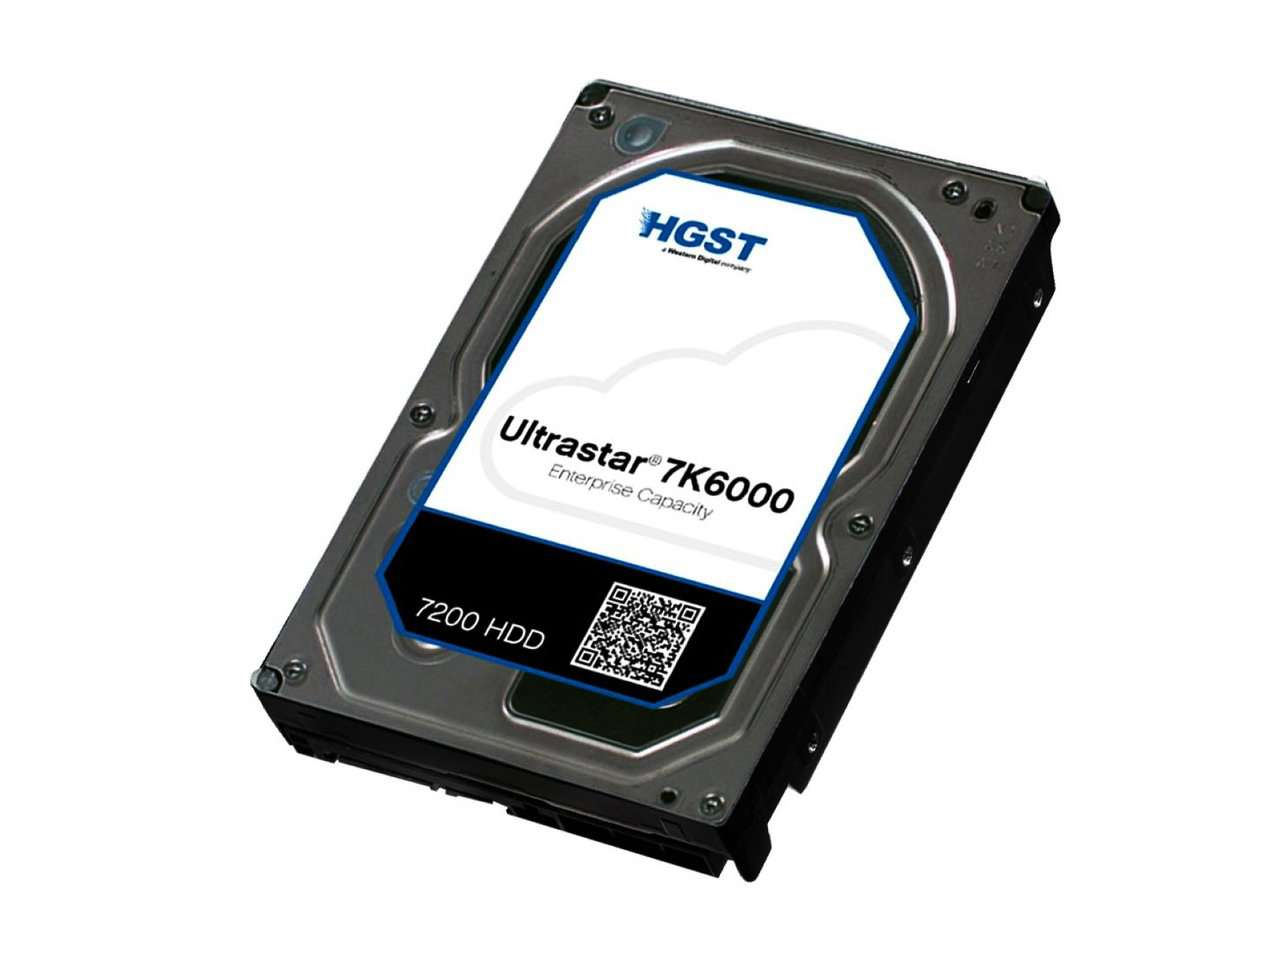 HGST Ultrastar 7K6000 0F22808  HUS726020AL4211 2TB 7.2K RPM SAS 12Gb/s 4Kn 128MB Cache 3.5" TCG Manufacturer Recertified HDD